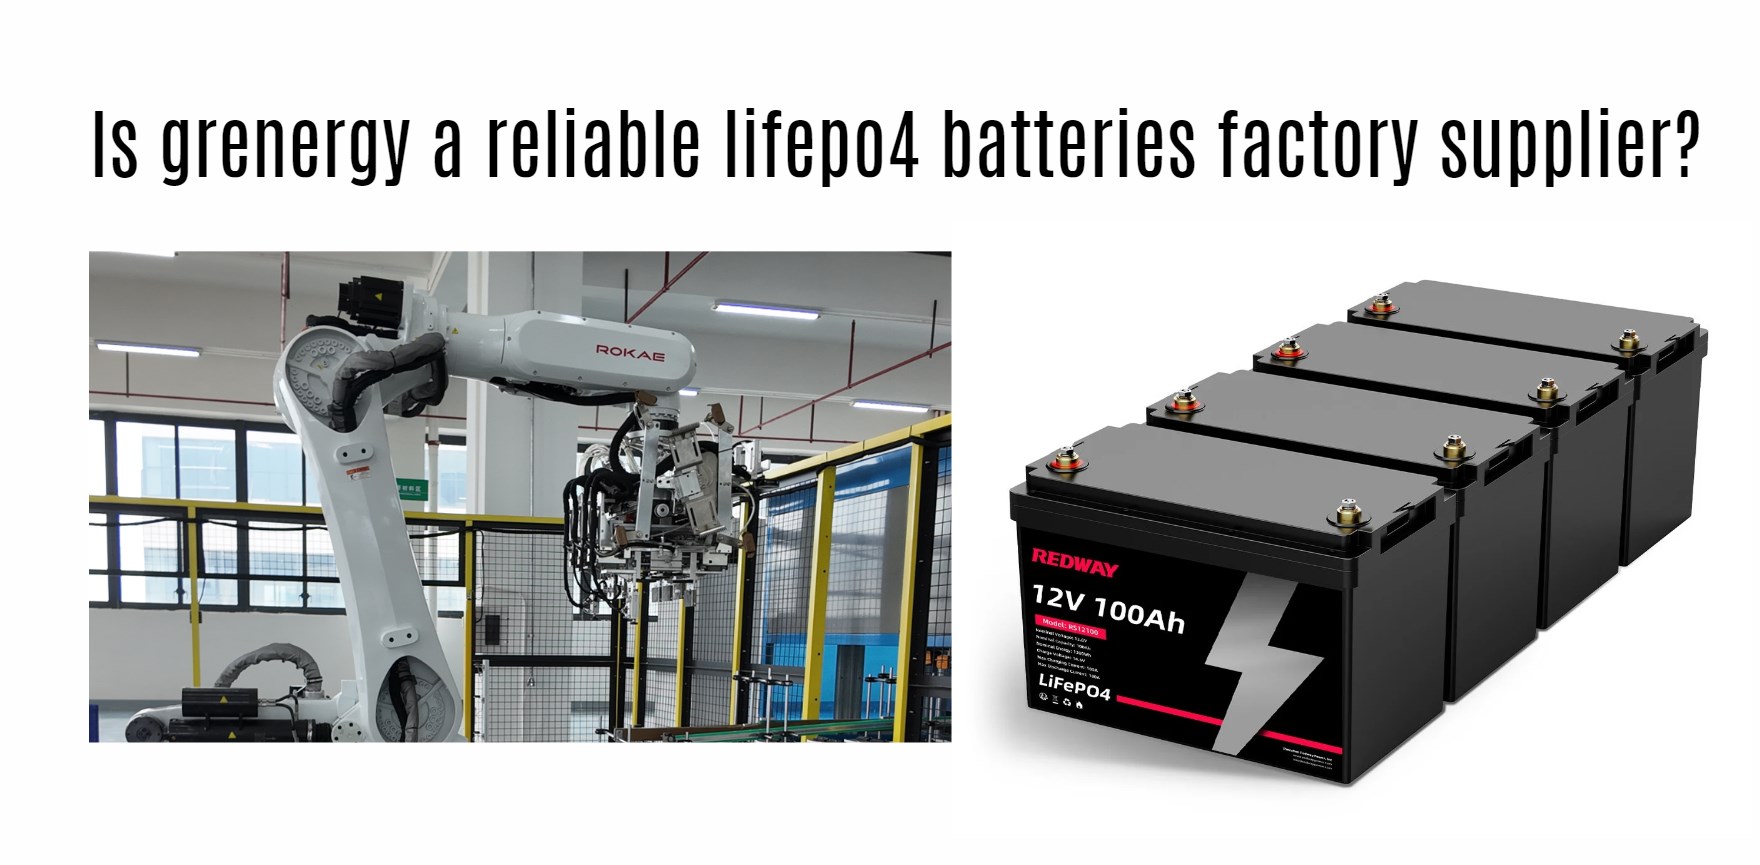 Is grenergy a reliable lifepo4 batteries factory supplier? 12v 100ah rv lithium battery factory oem self-heating marine boat